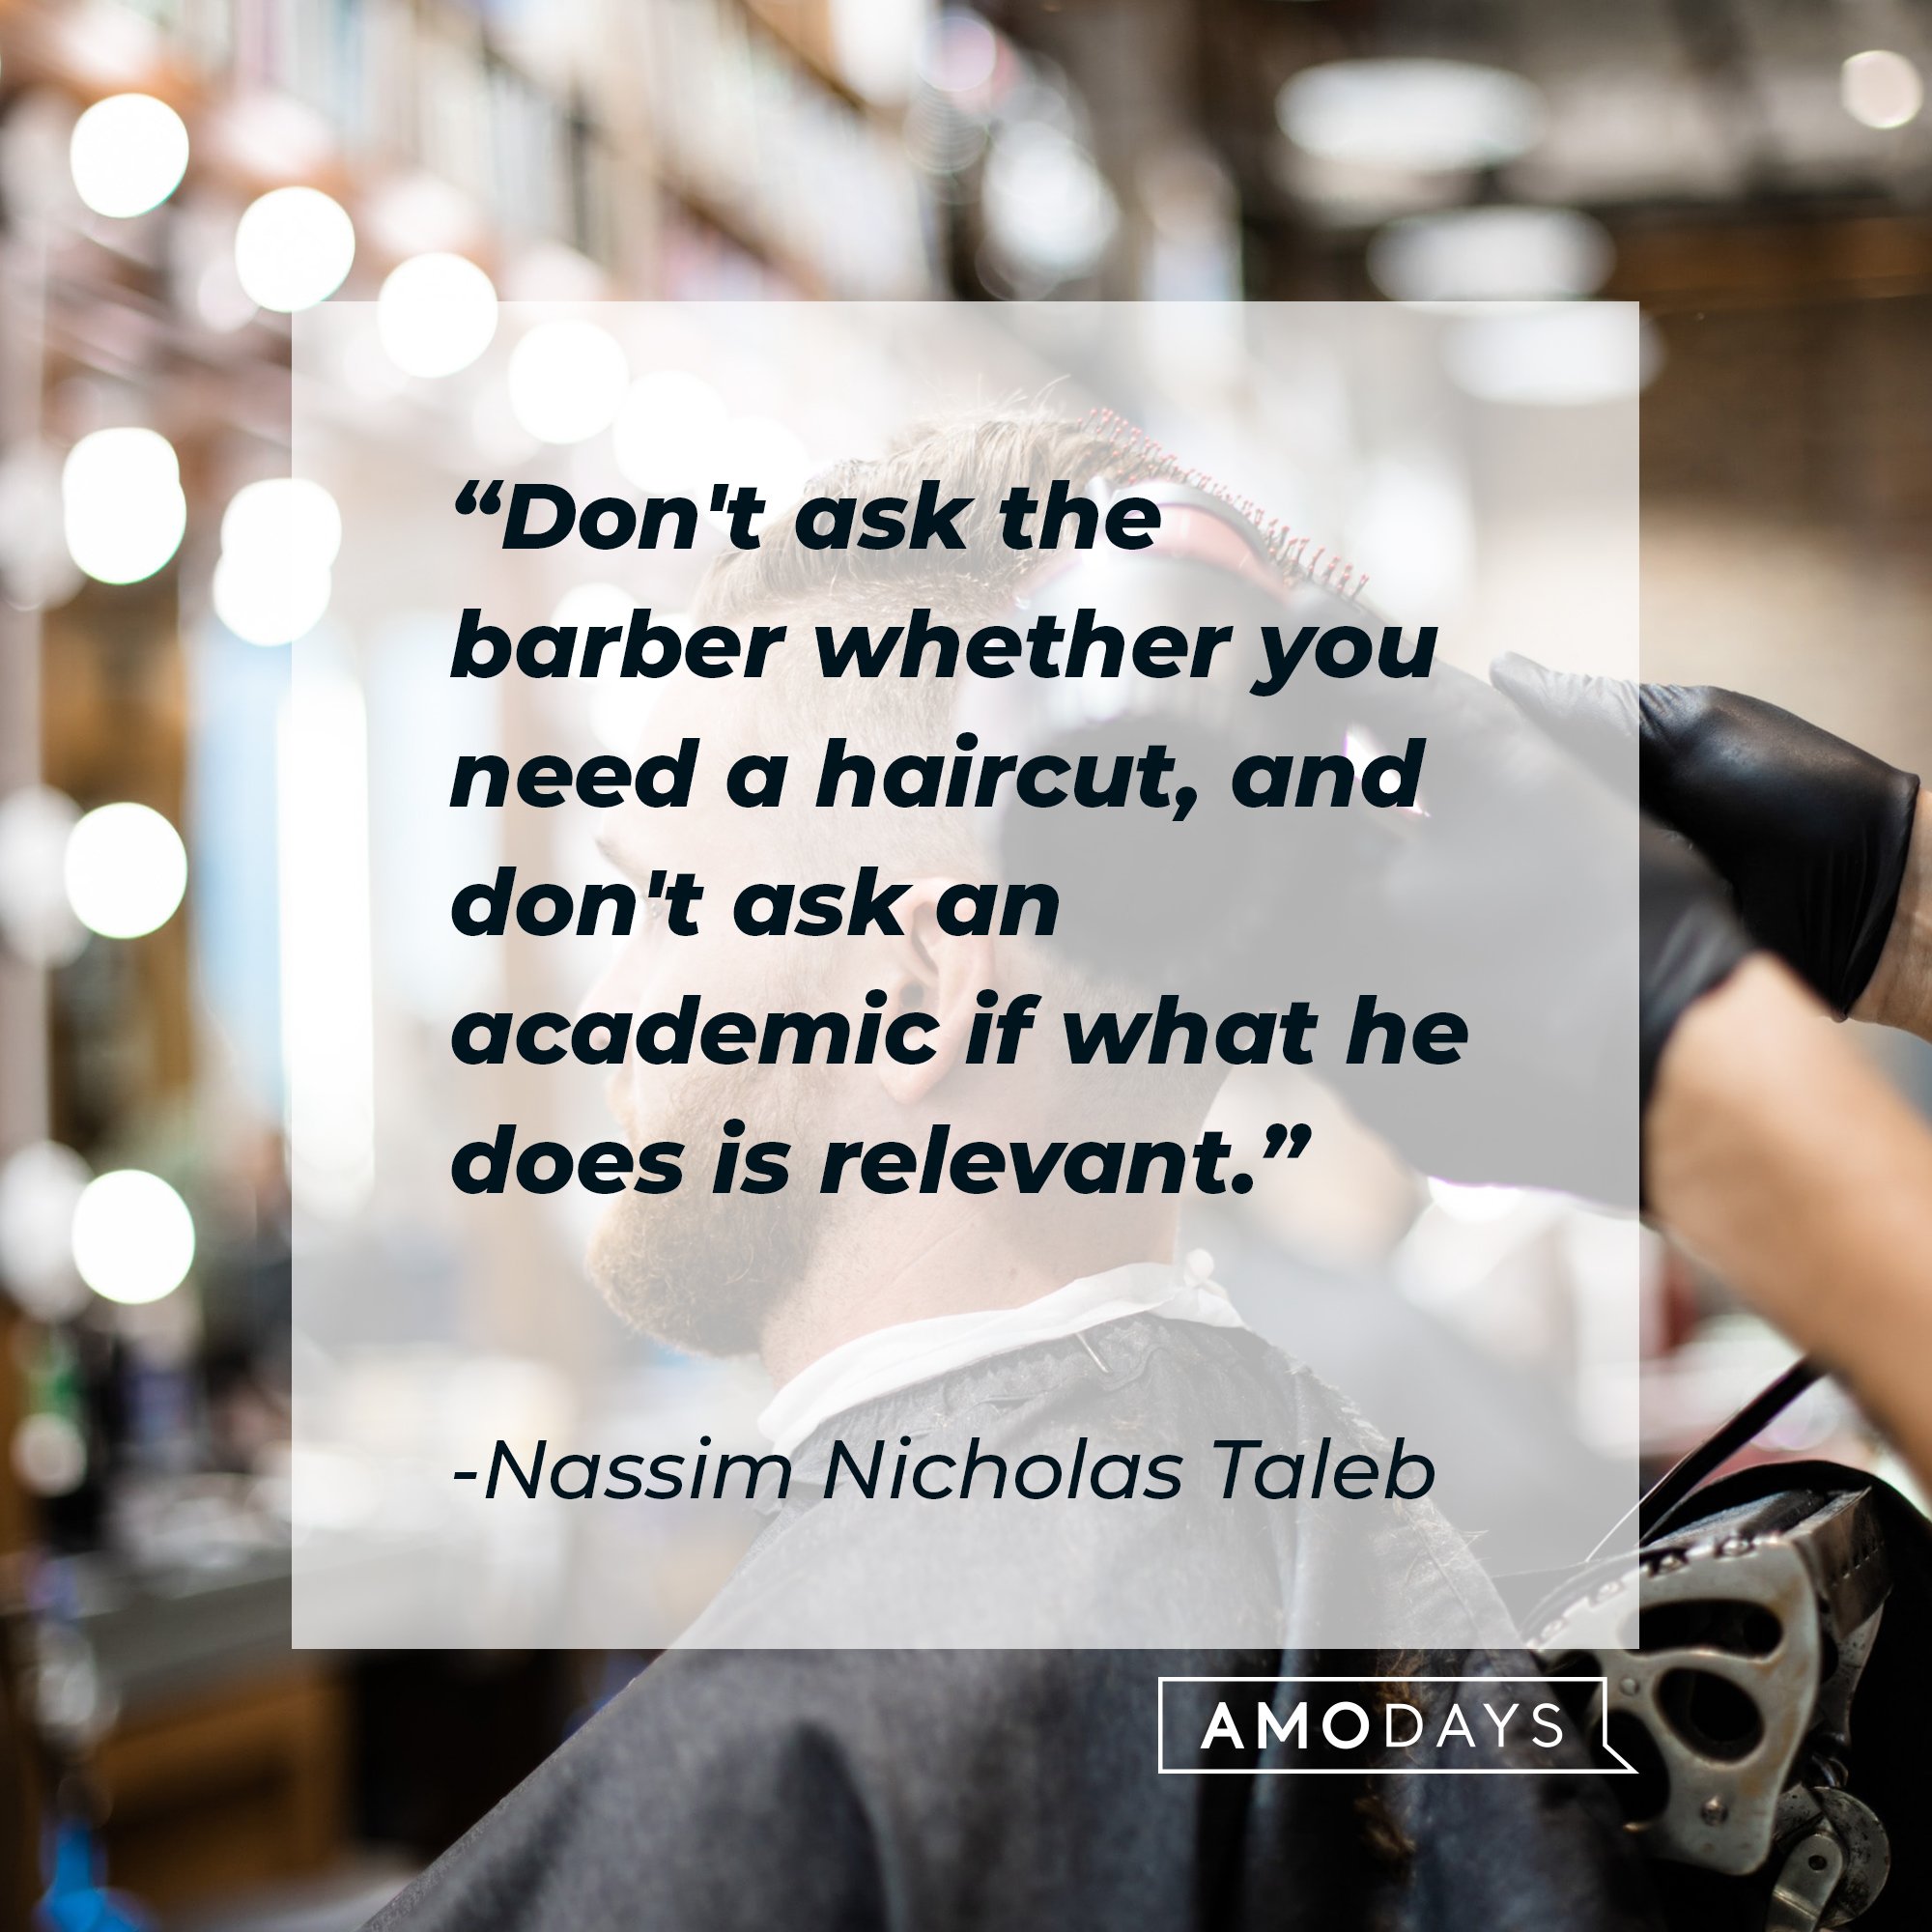 Nassim Nicholas Taleb's quote: "Don't ask the barber whether you need a haircut, and don't ask an academic if what he does is relevant." | Image: AmoDays